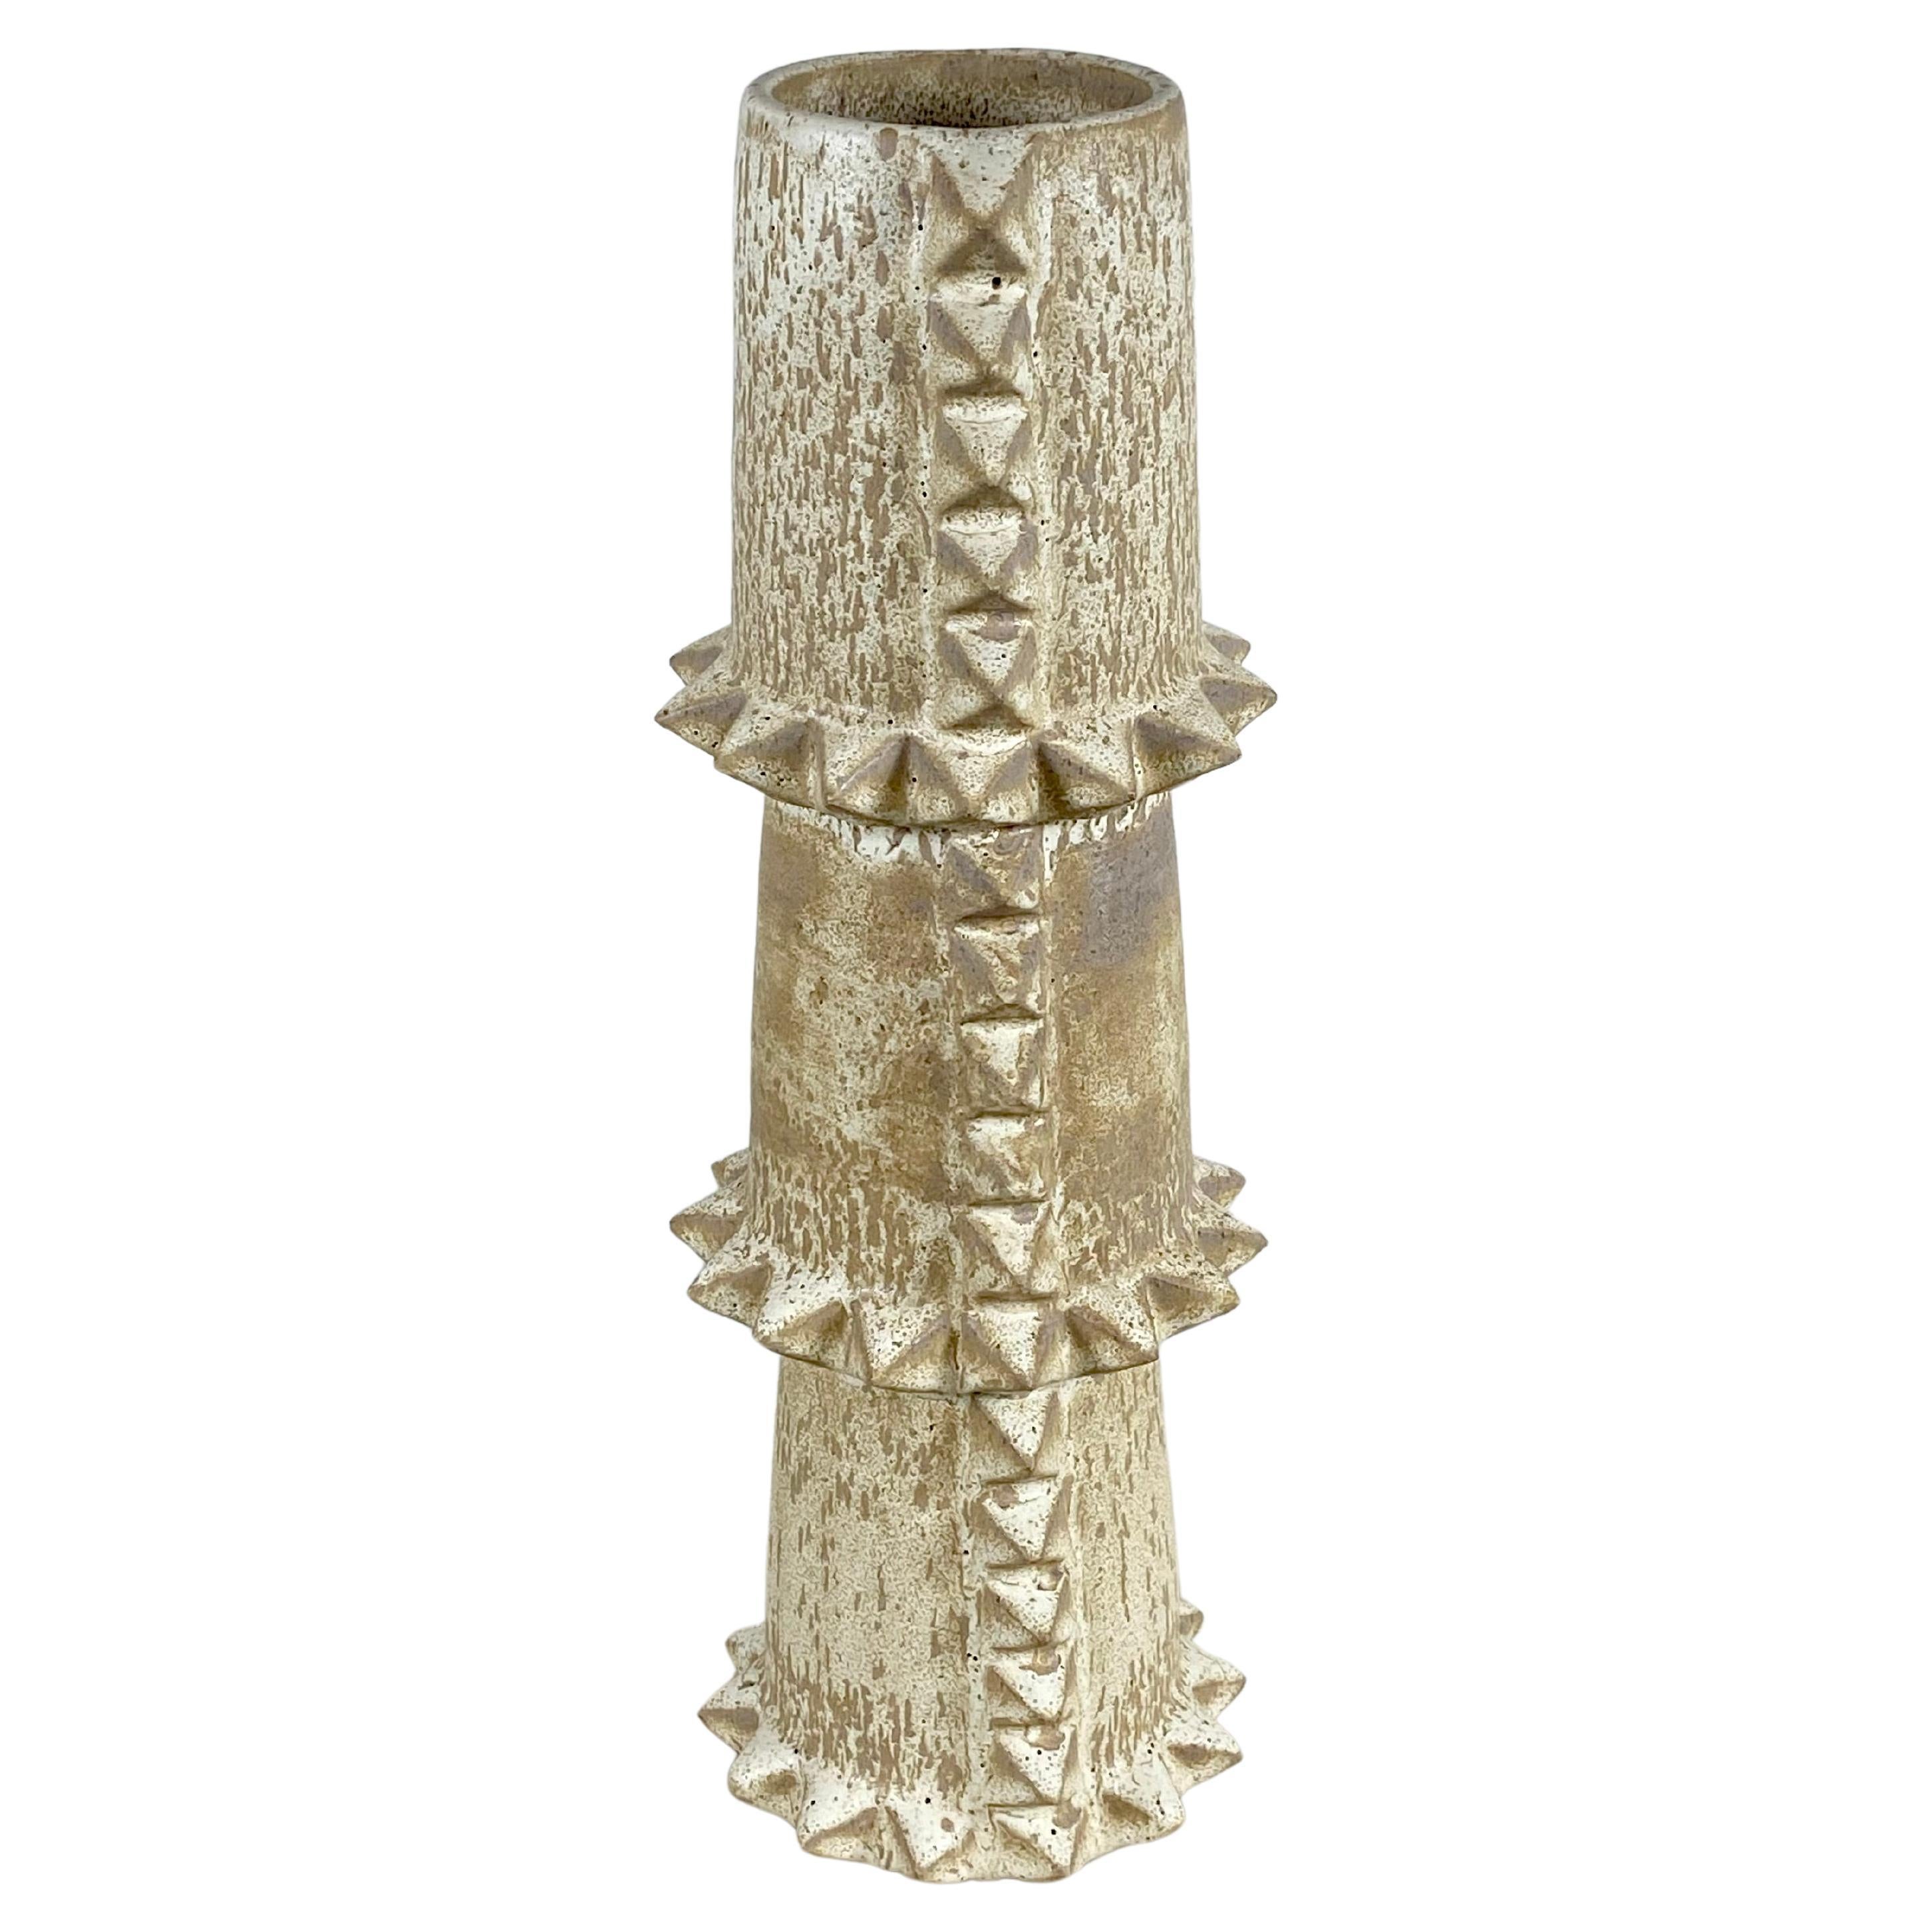 Tall Spiky Ceramic Vase By LGS Studio For Sale